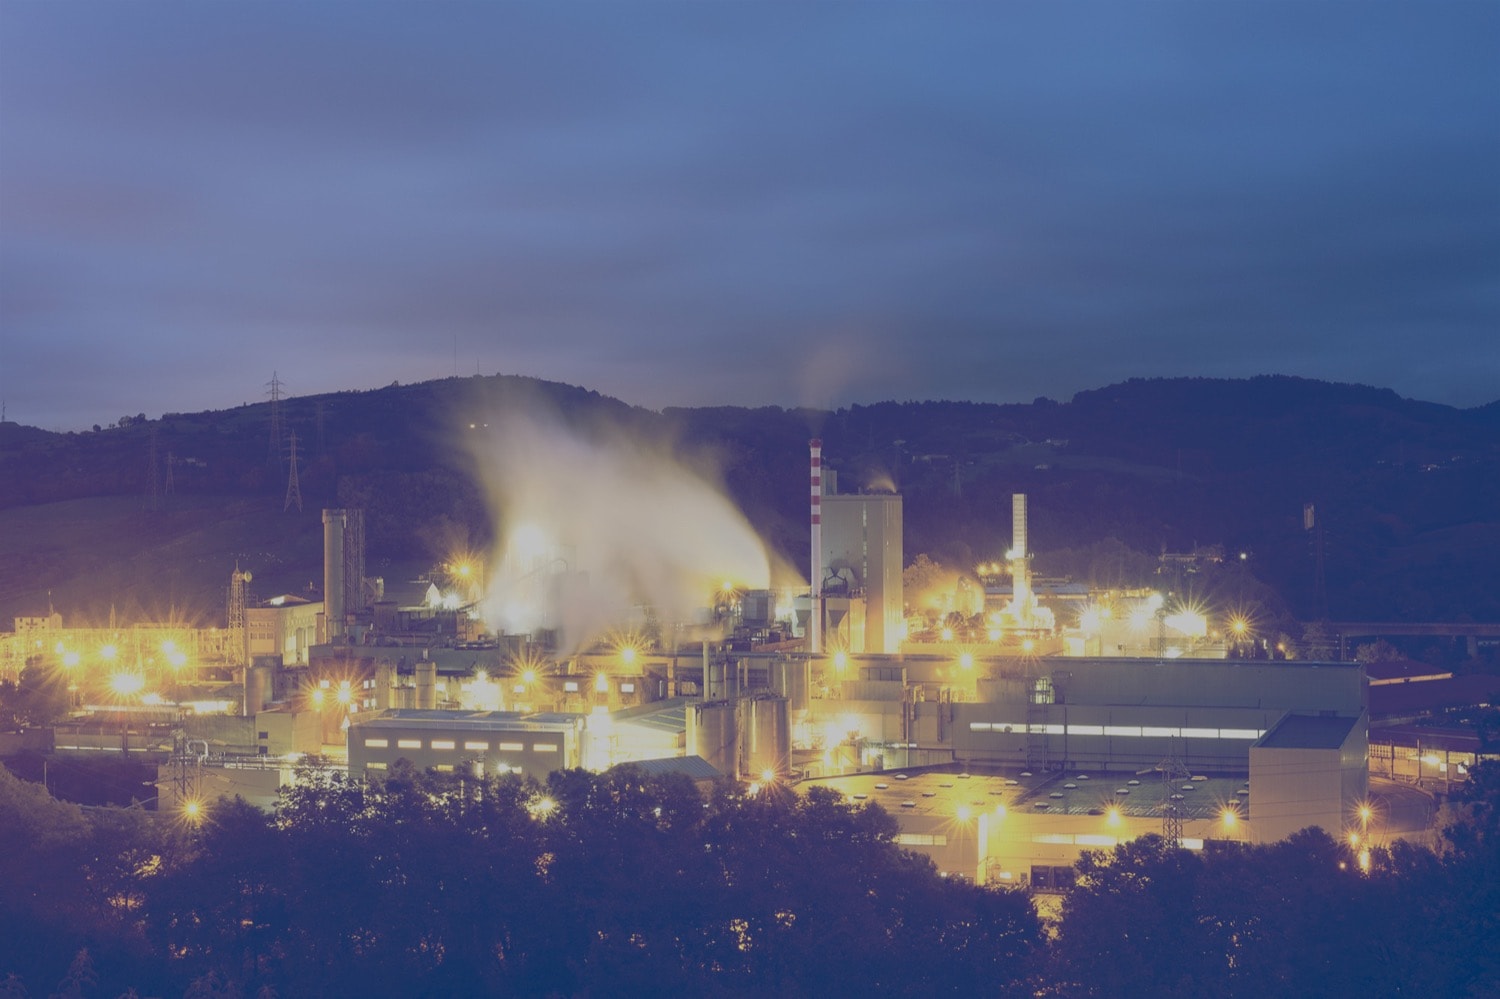 Panoramic view of an oil refinery at night.